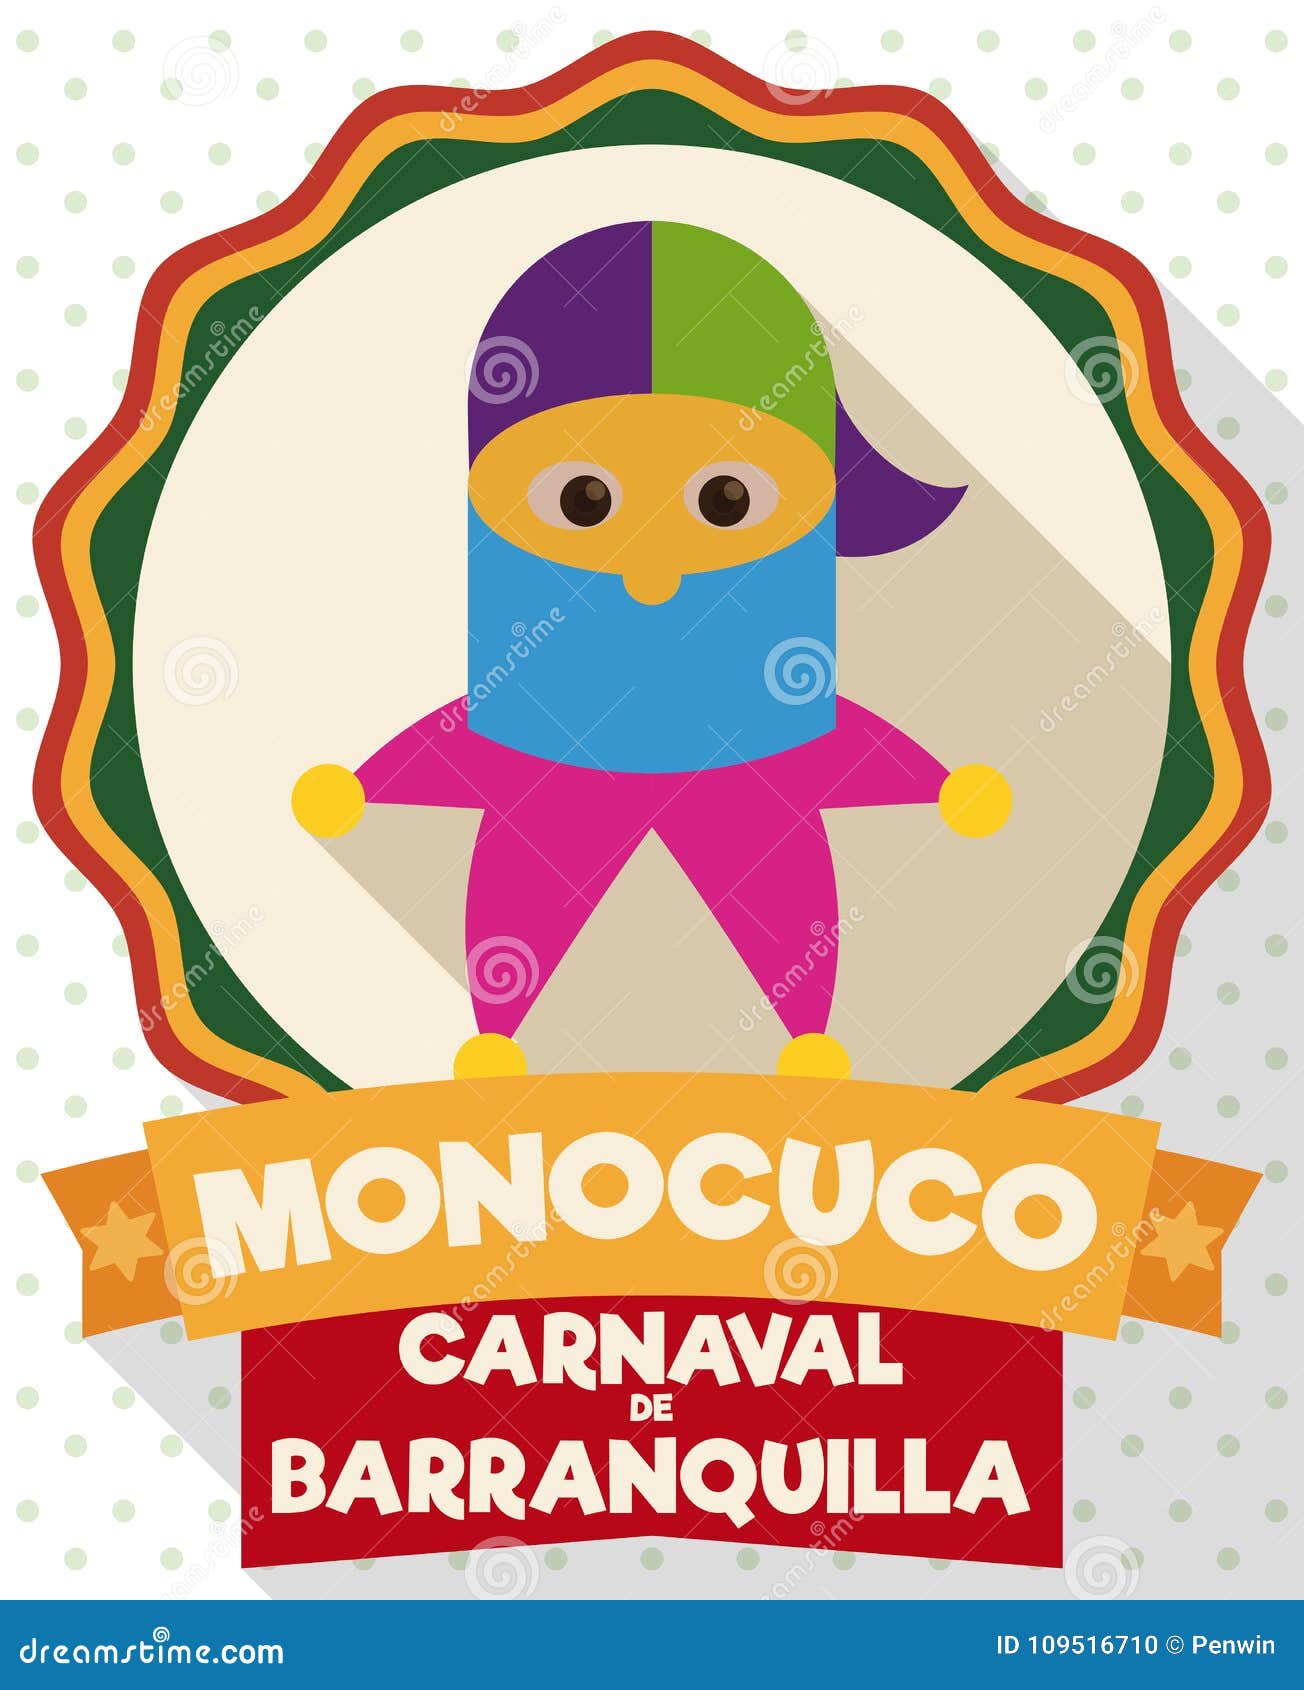 monocuco in a button in flat style for barranquilla`s carnival,  